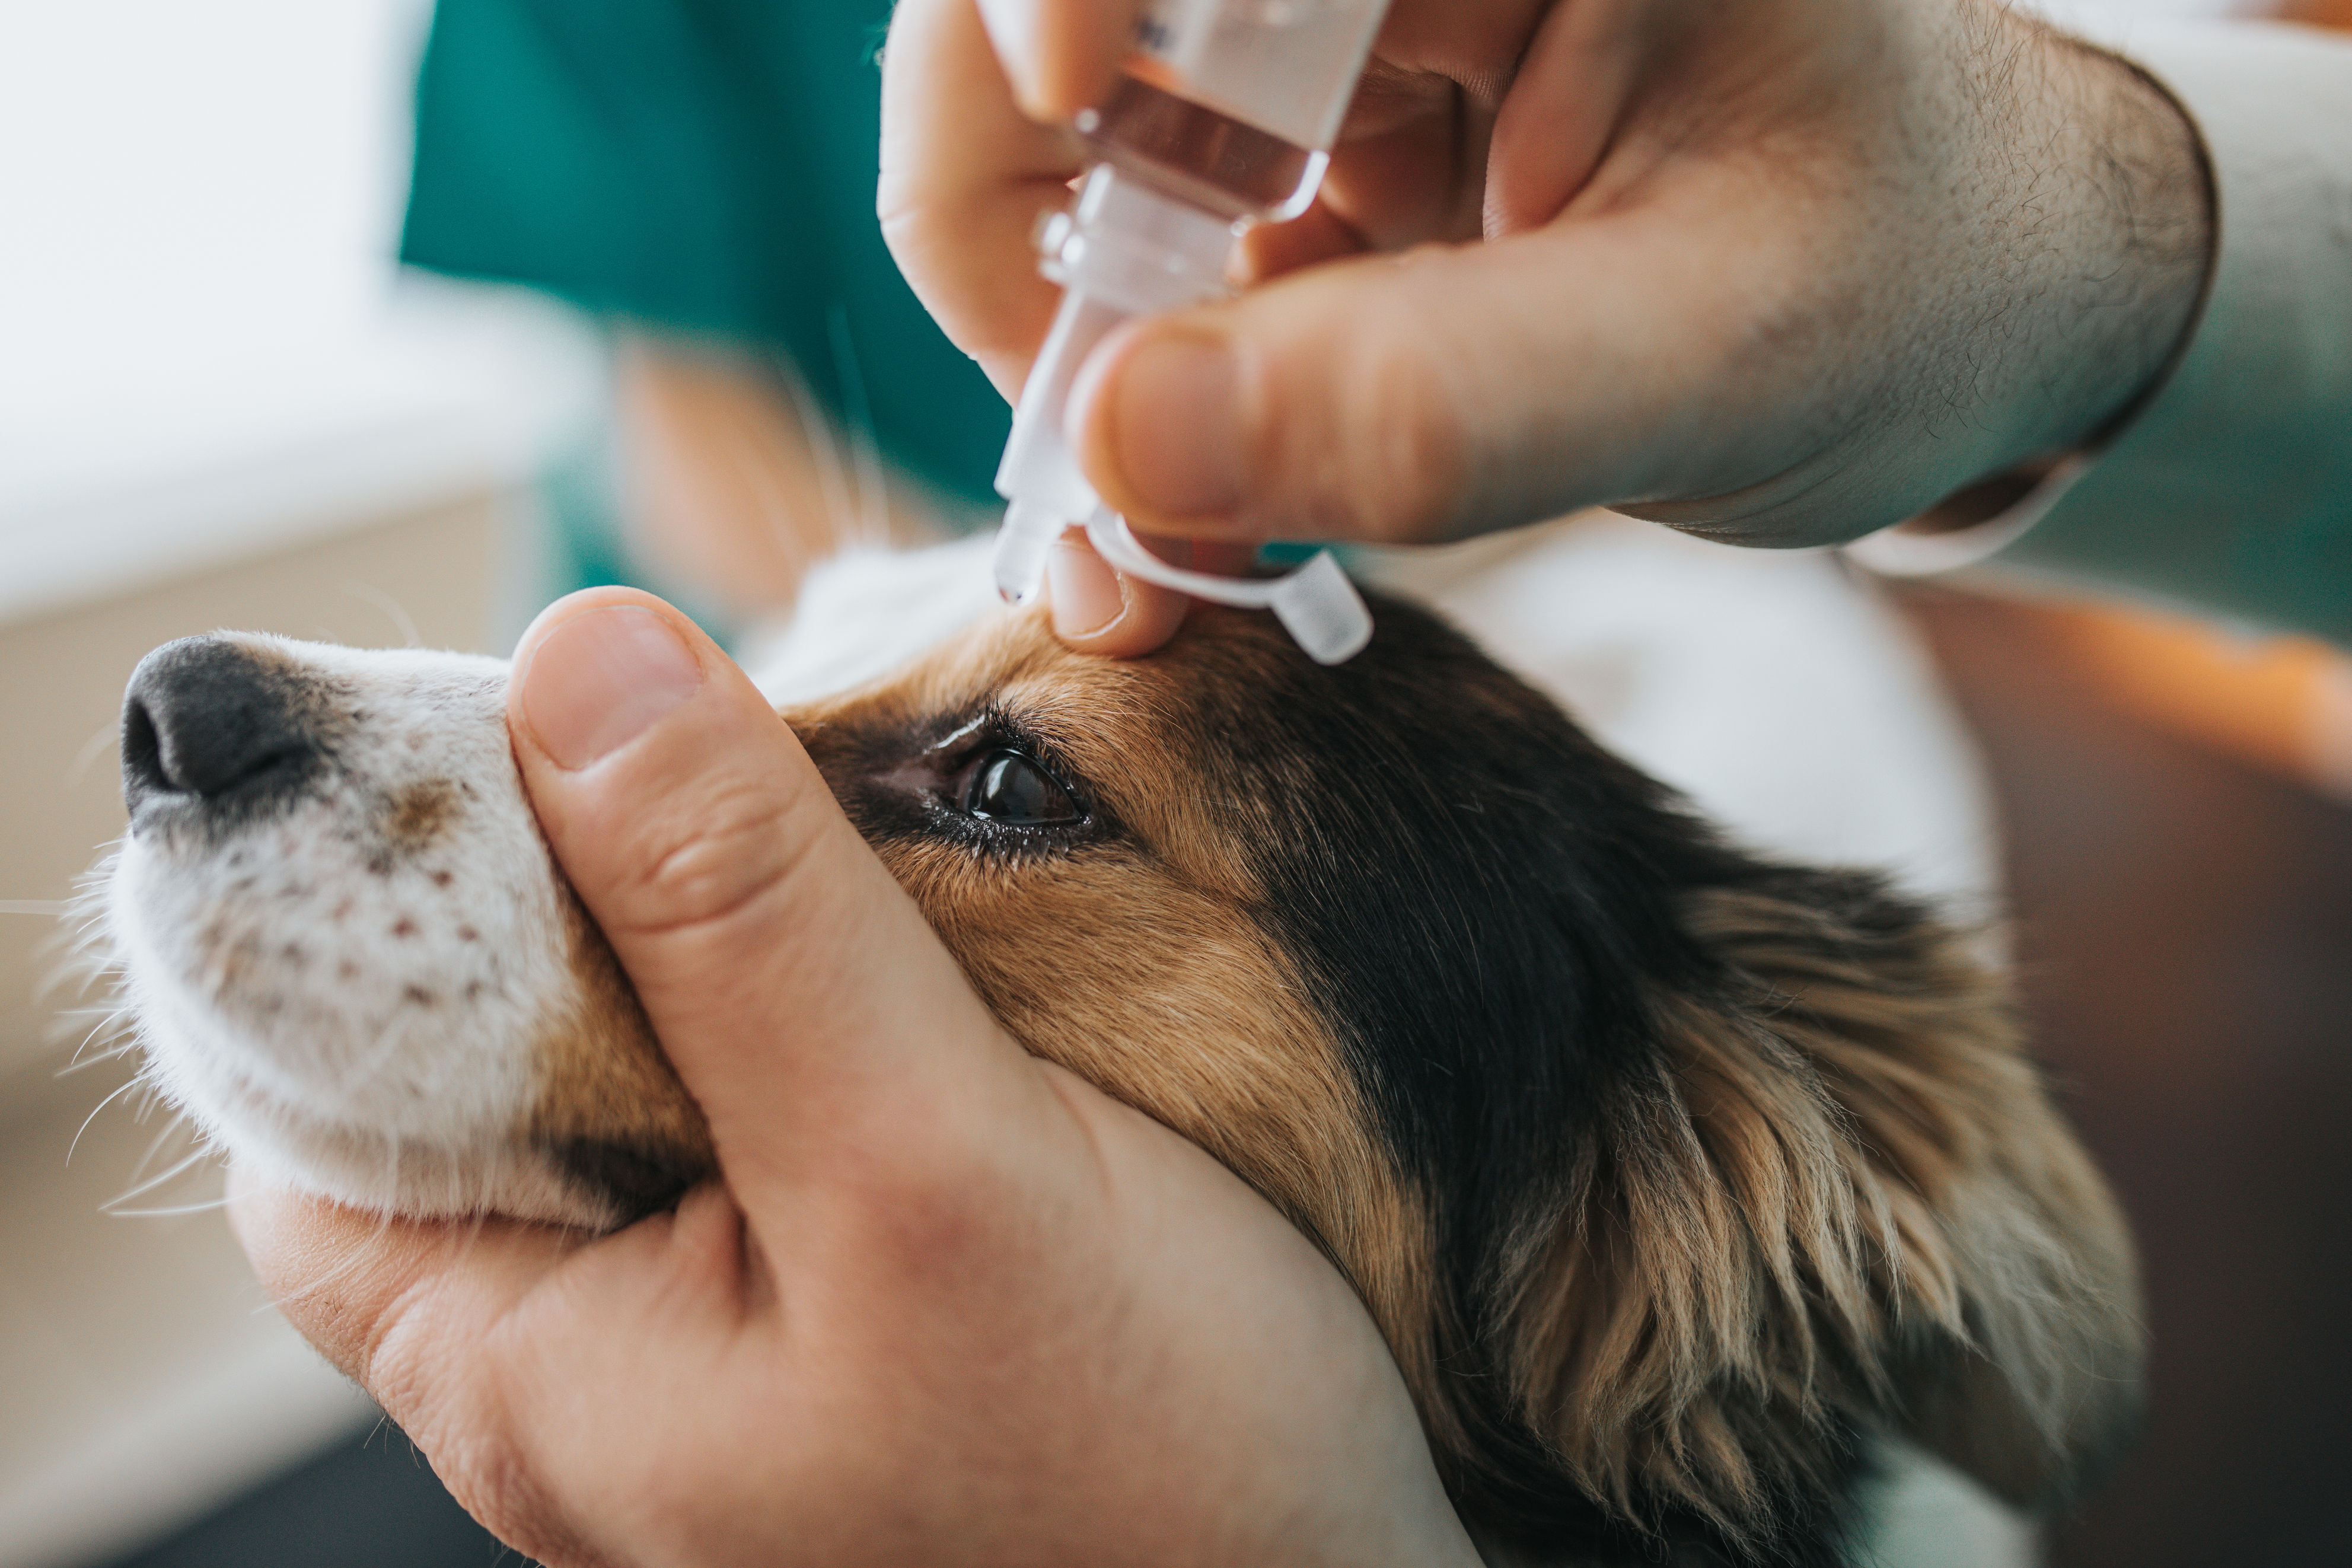 Can You Give Dogs Eye Drops For Humans 3 Simple Steps To Administer Eye Drops To Your Dog Medicanimal Com